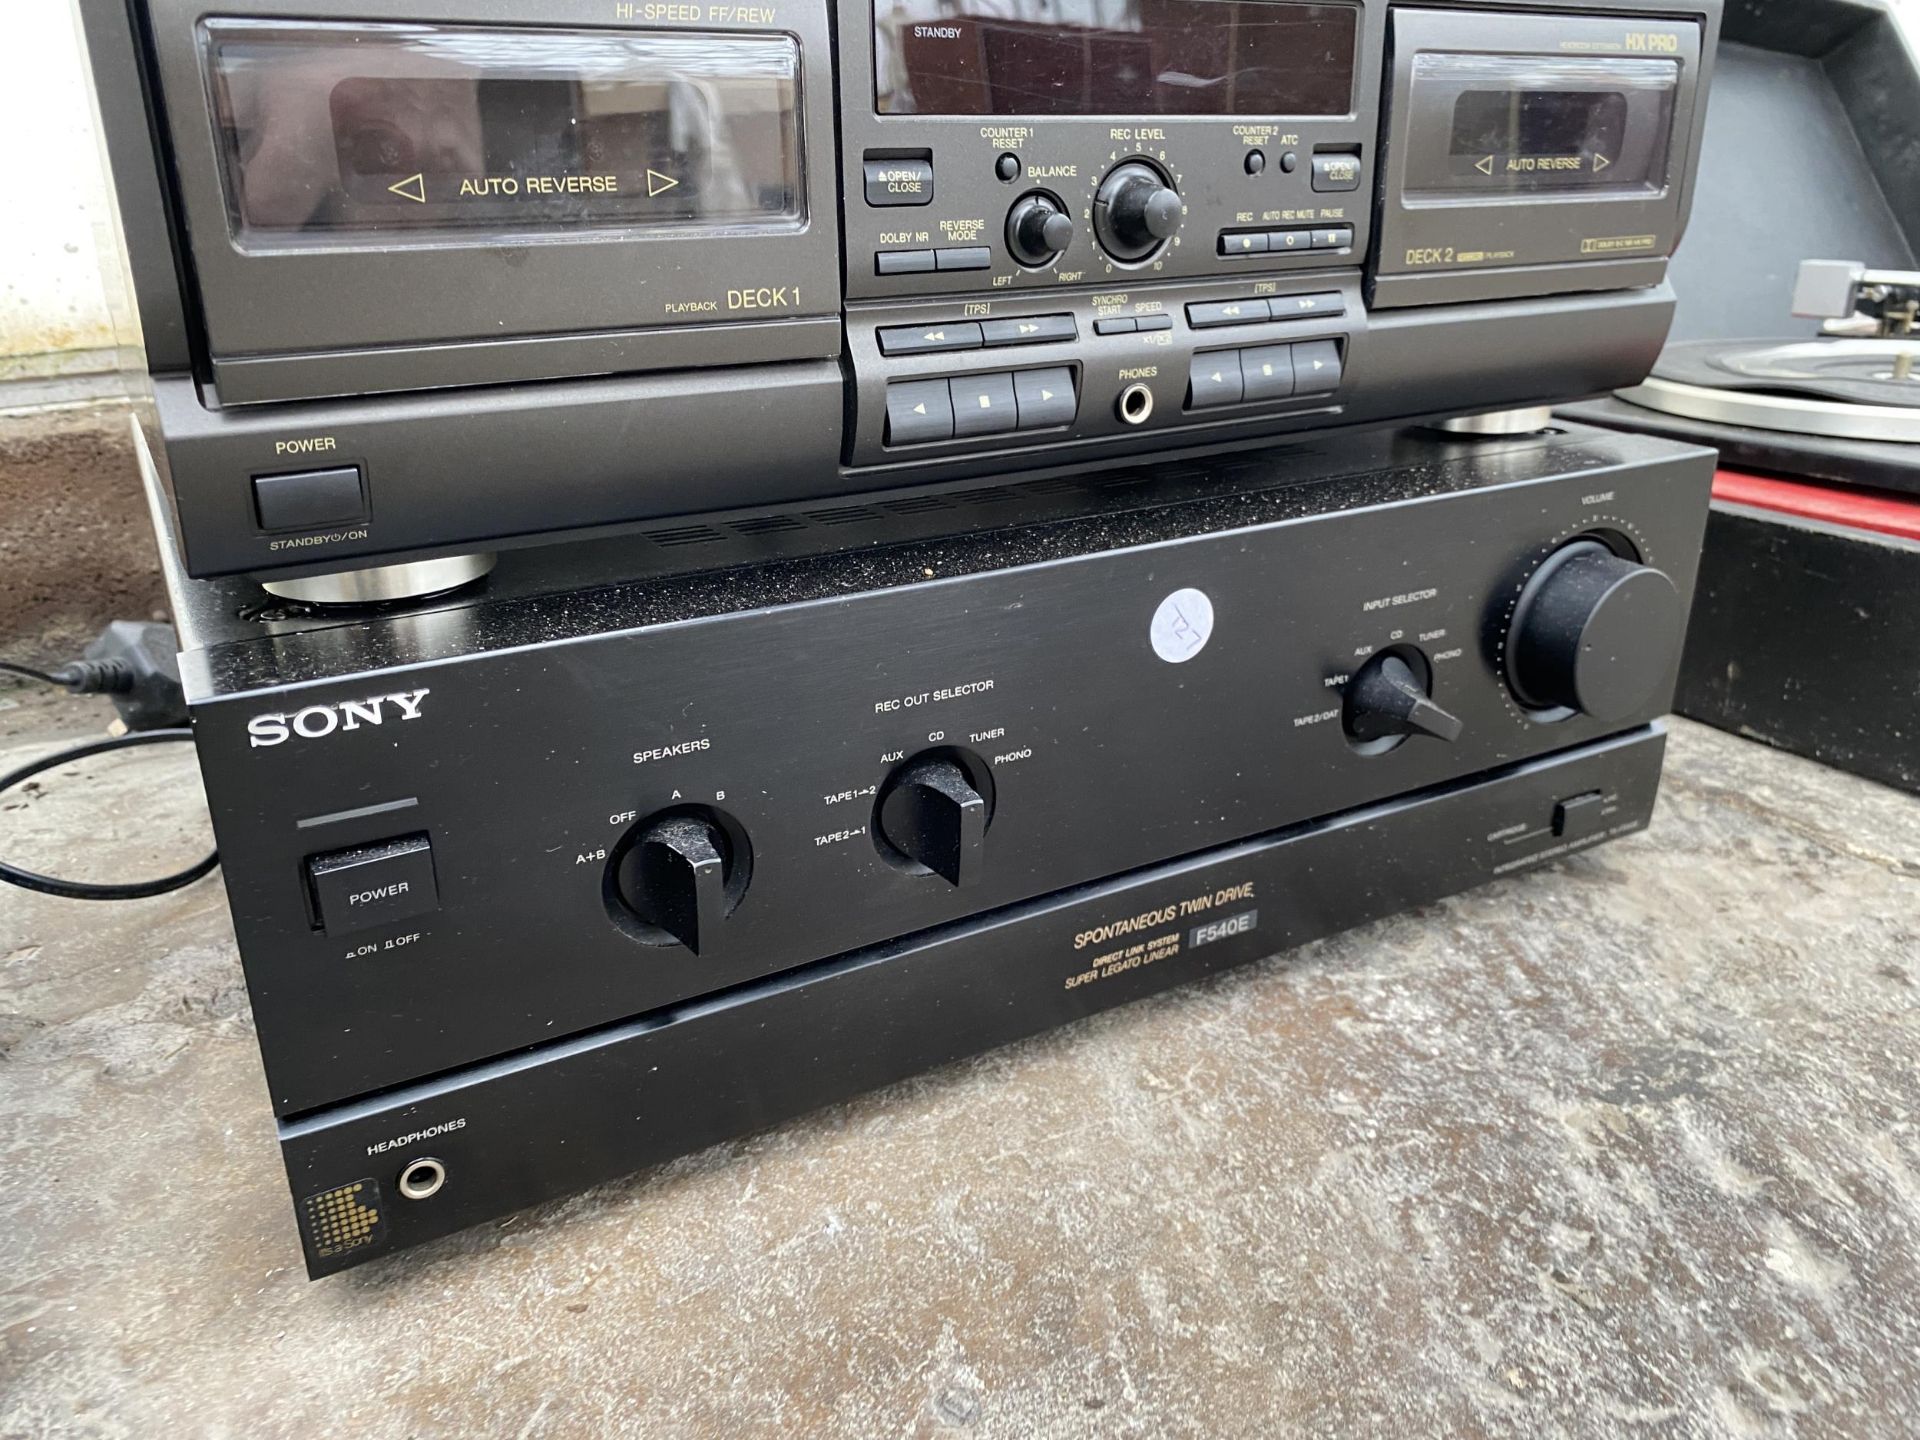 A TECHNICS STEREO CASETTE DECK AND A SONY AMPLIFIER - Image 2 of 2